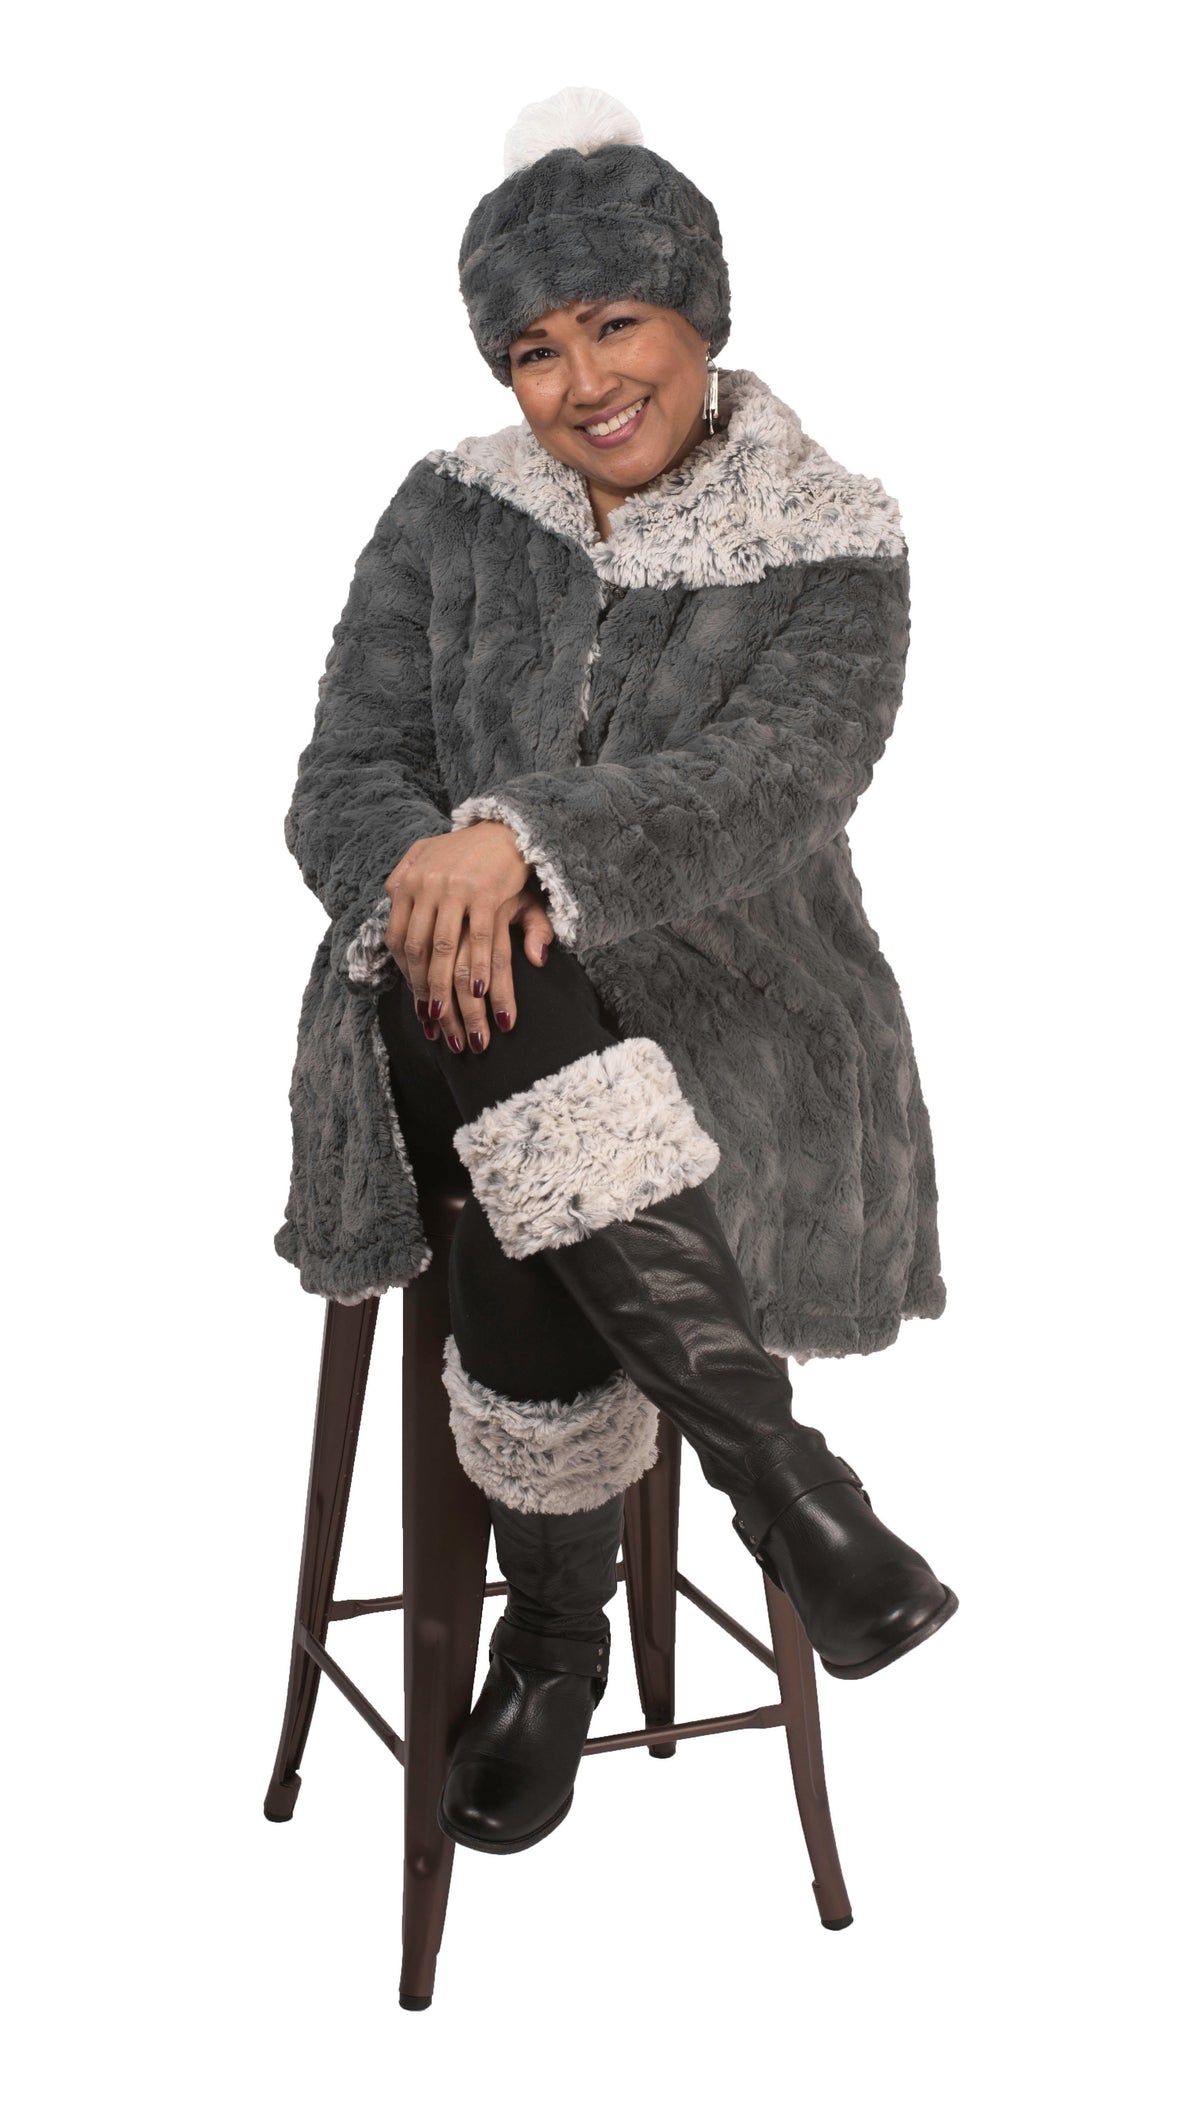 Model sitting on chair wearing a matching out of hat coat and Boot | faux fur | Handmade by Pandemonium Millinery Seattle, WA USA